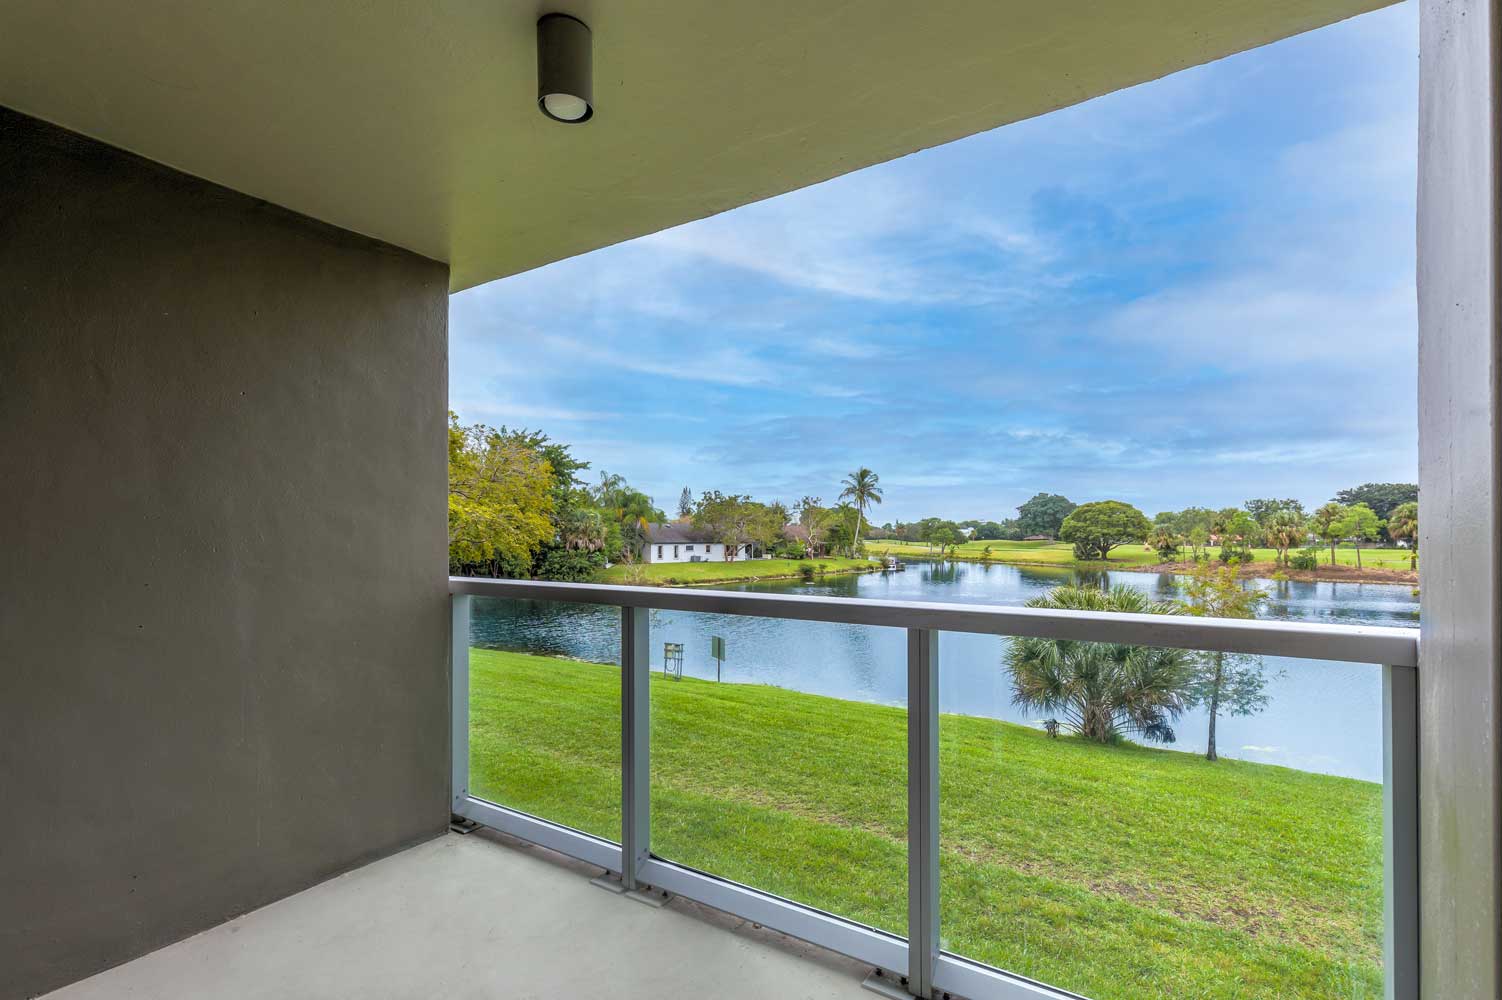 Private Patio or Balcony Available at Nottingham Pine Apartments in Plantation, FL